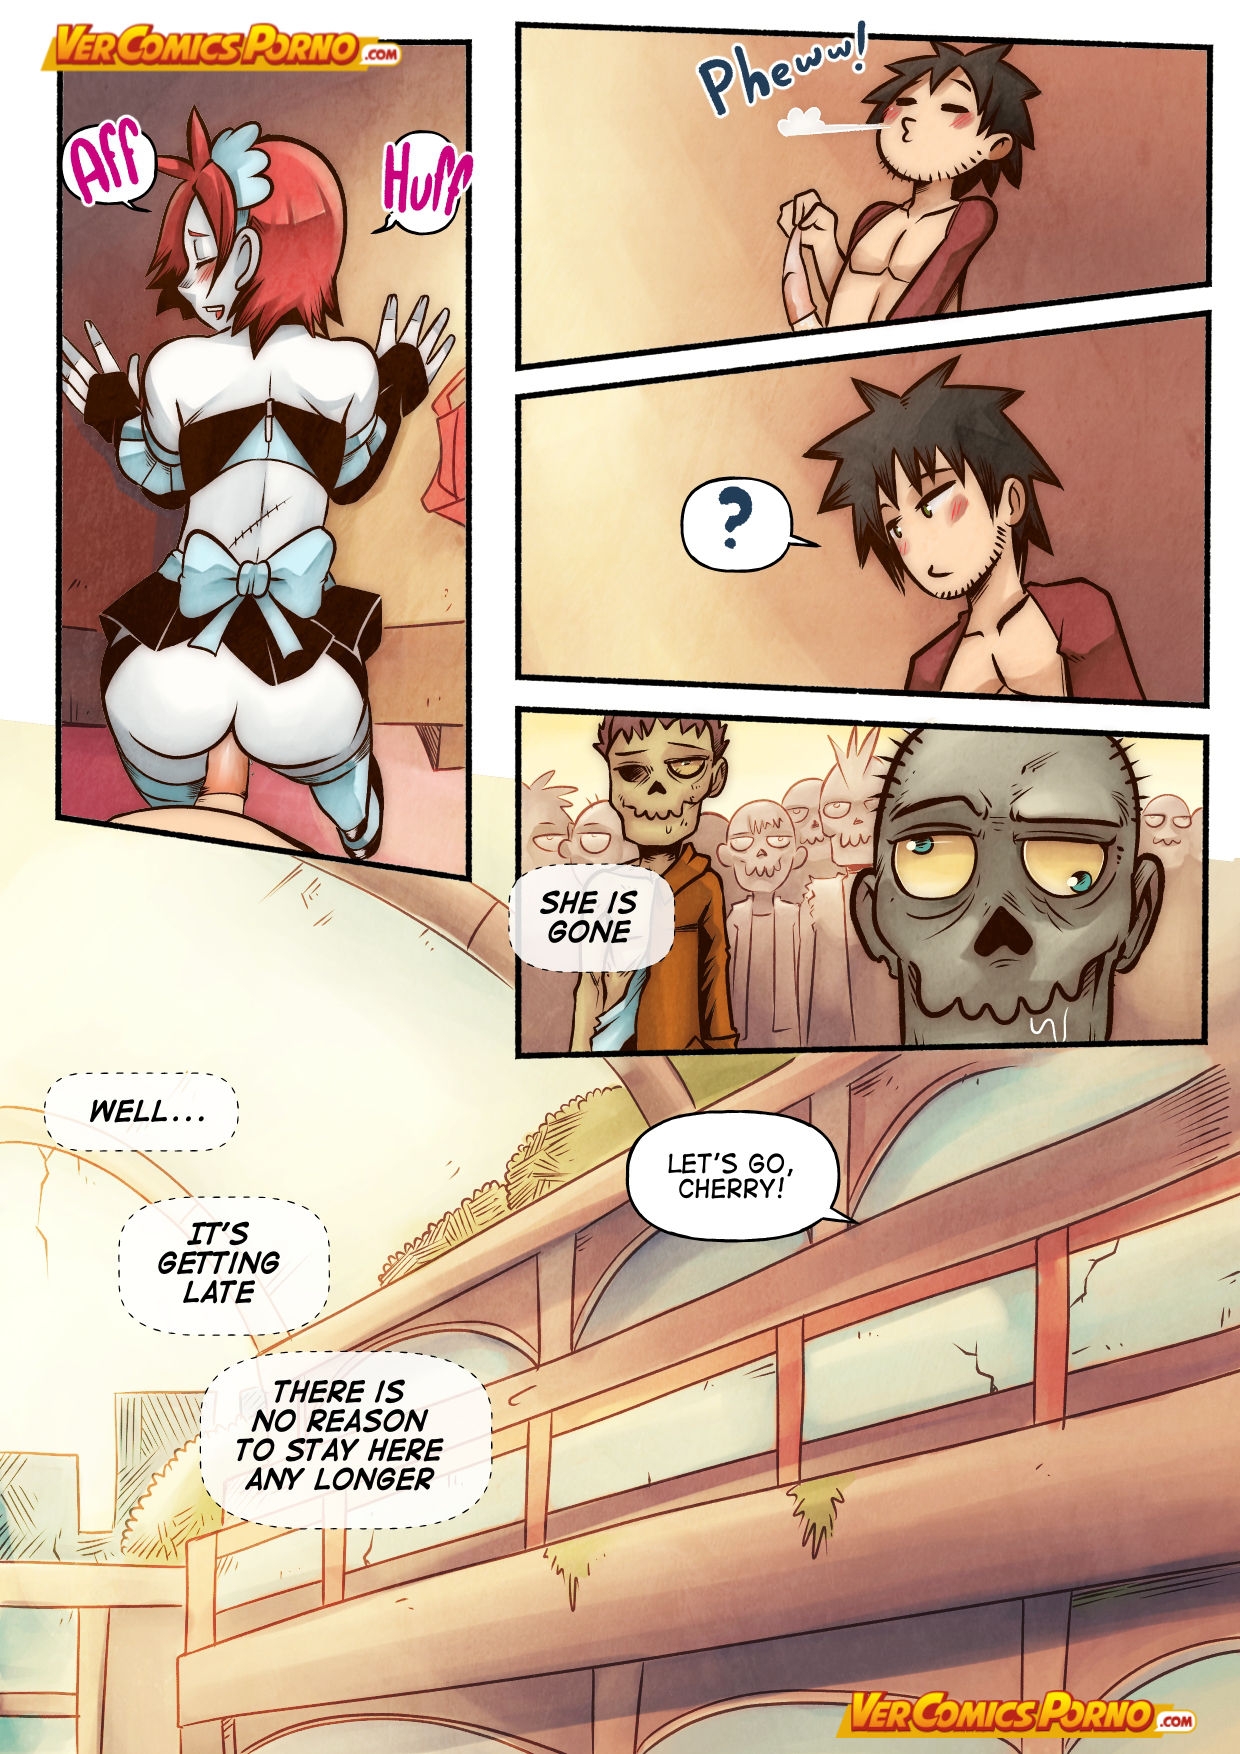 [Mr.E] Cherry Road Part 3: Shopping With A Zombie 25